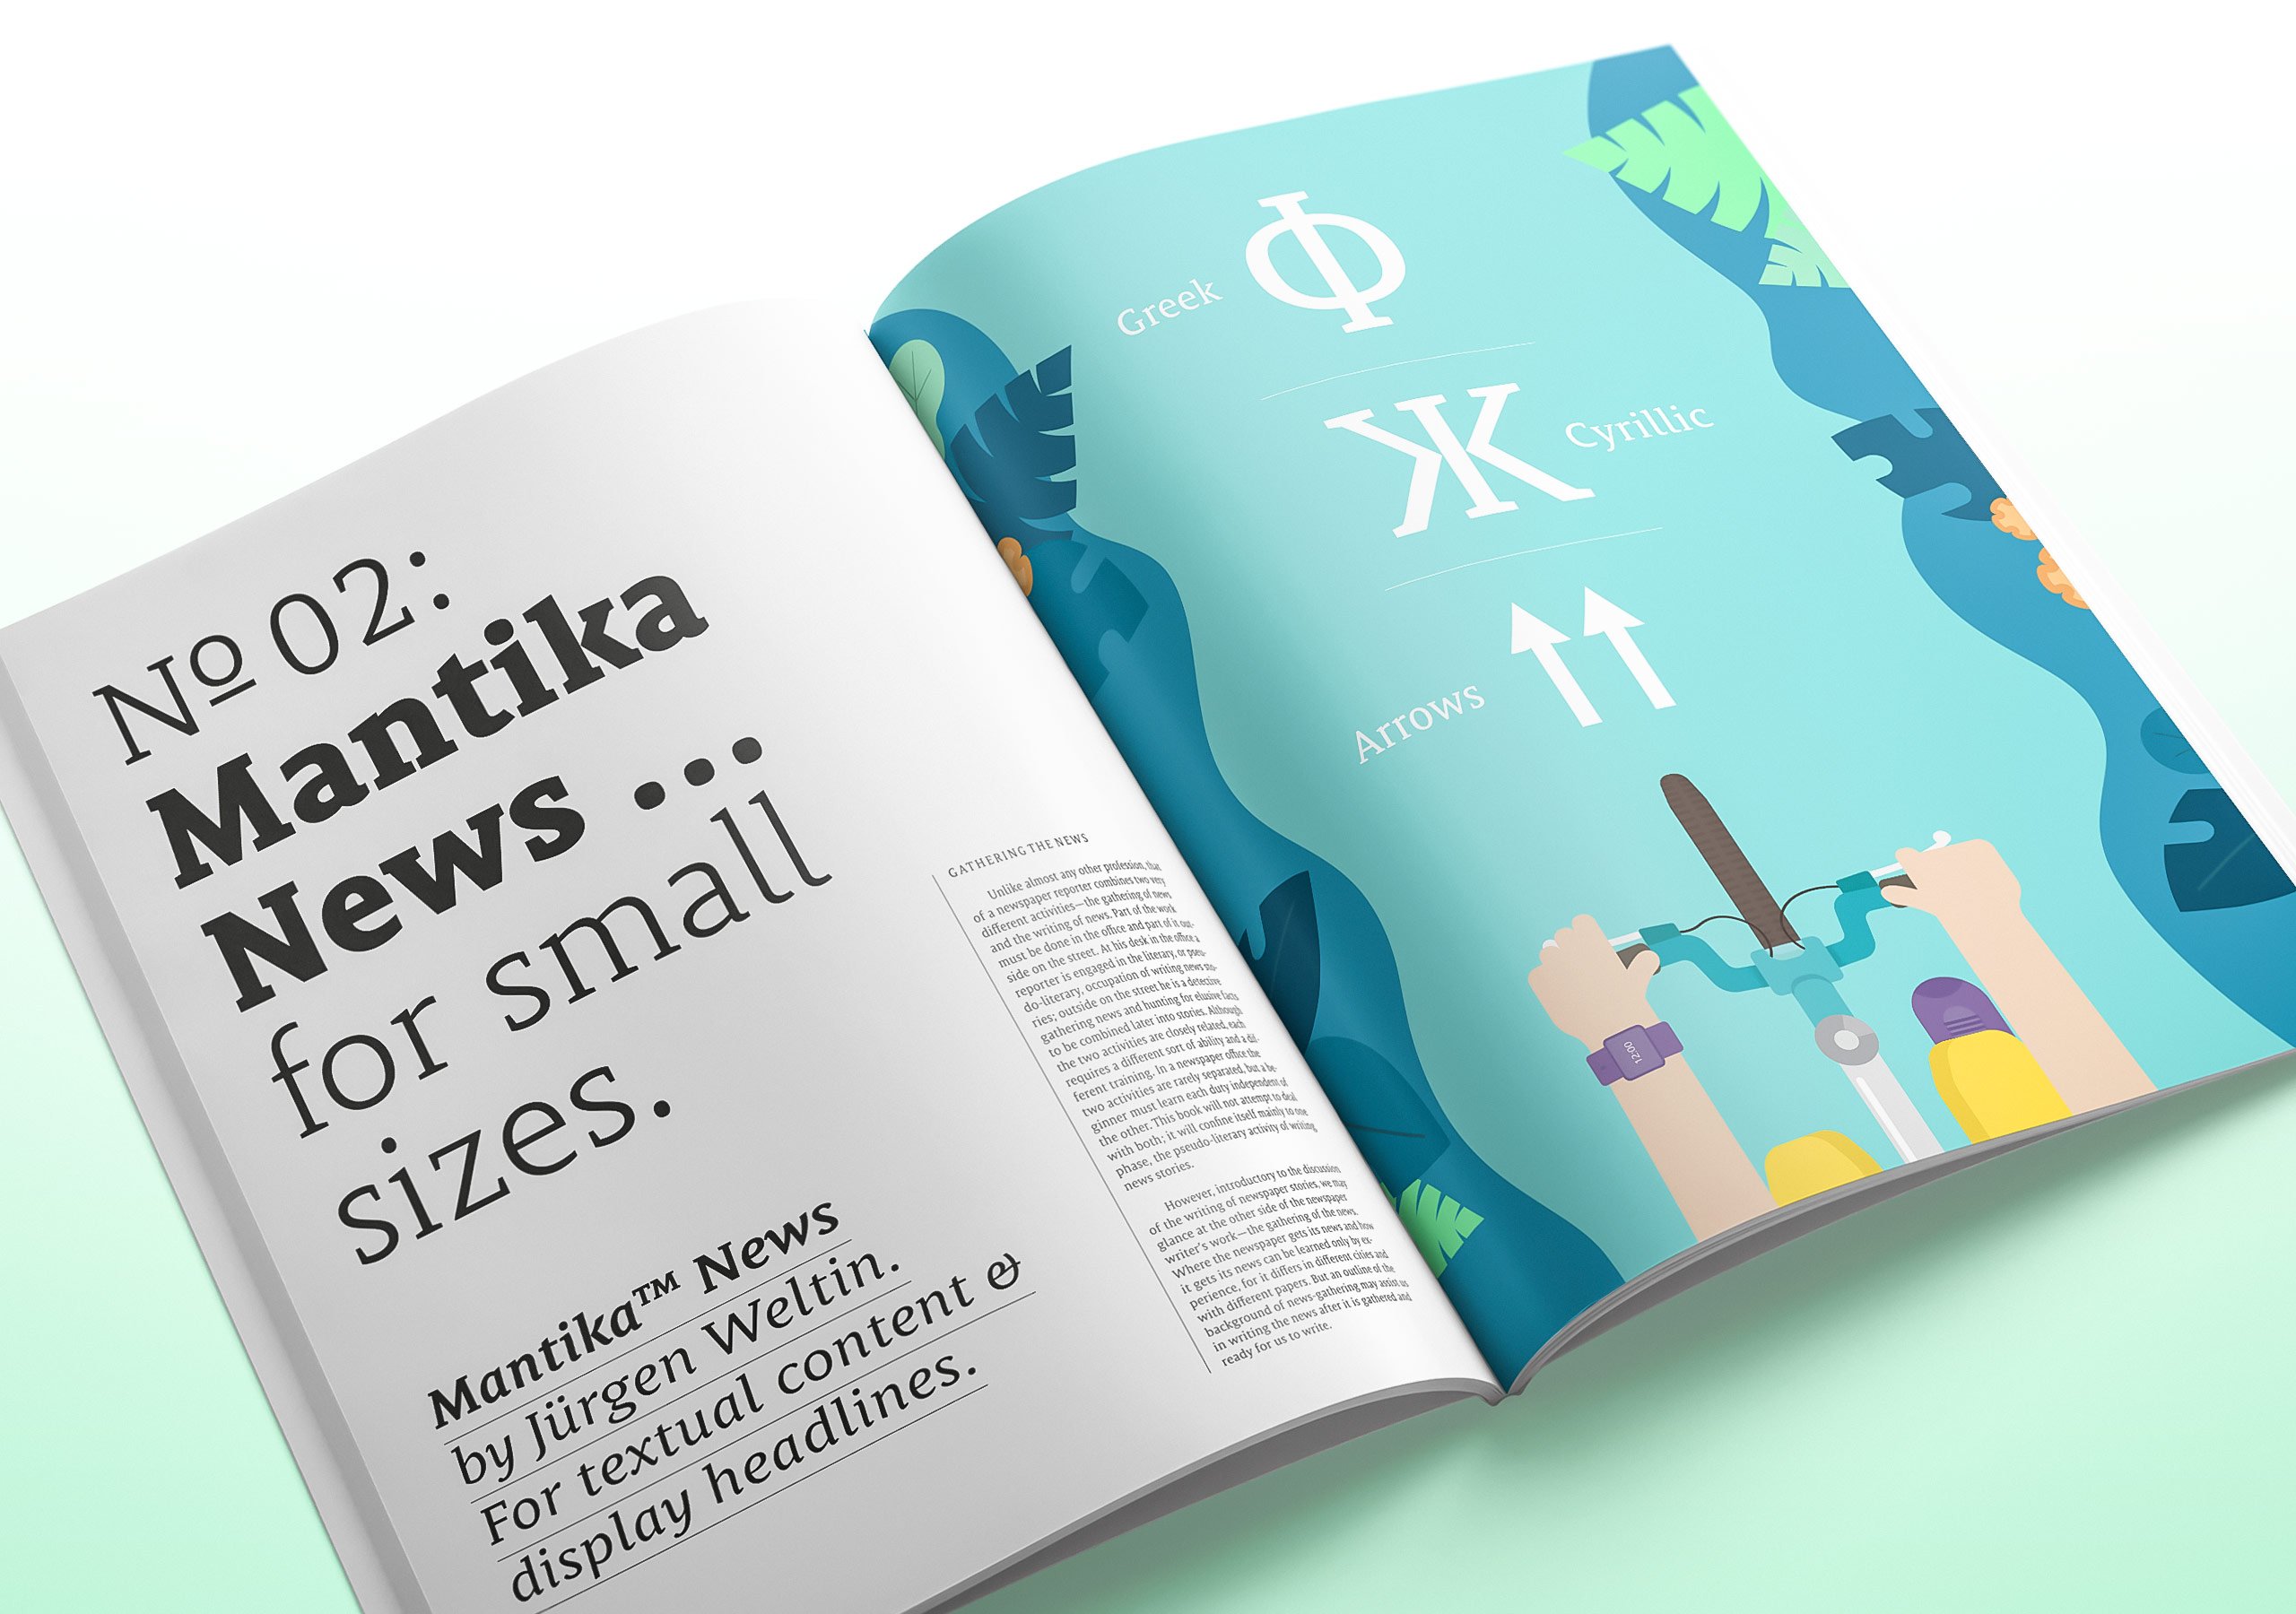 Fictitious use case for Mantika News by Alexandra Schwarzwald